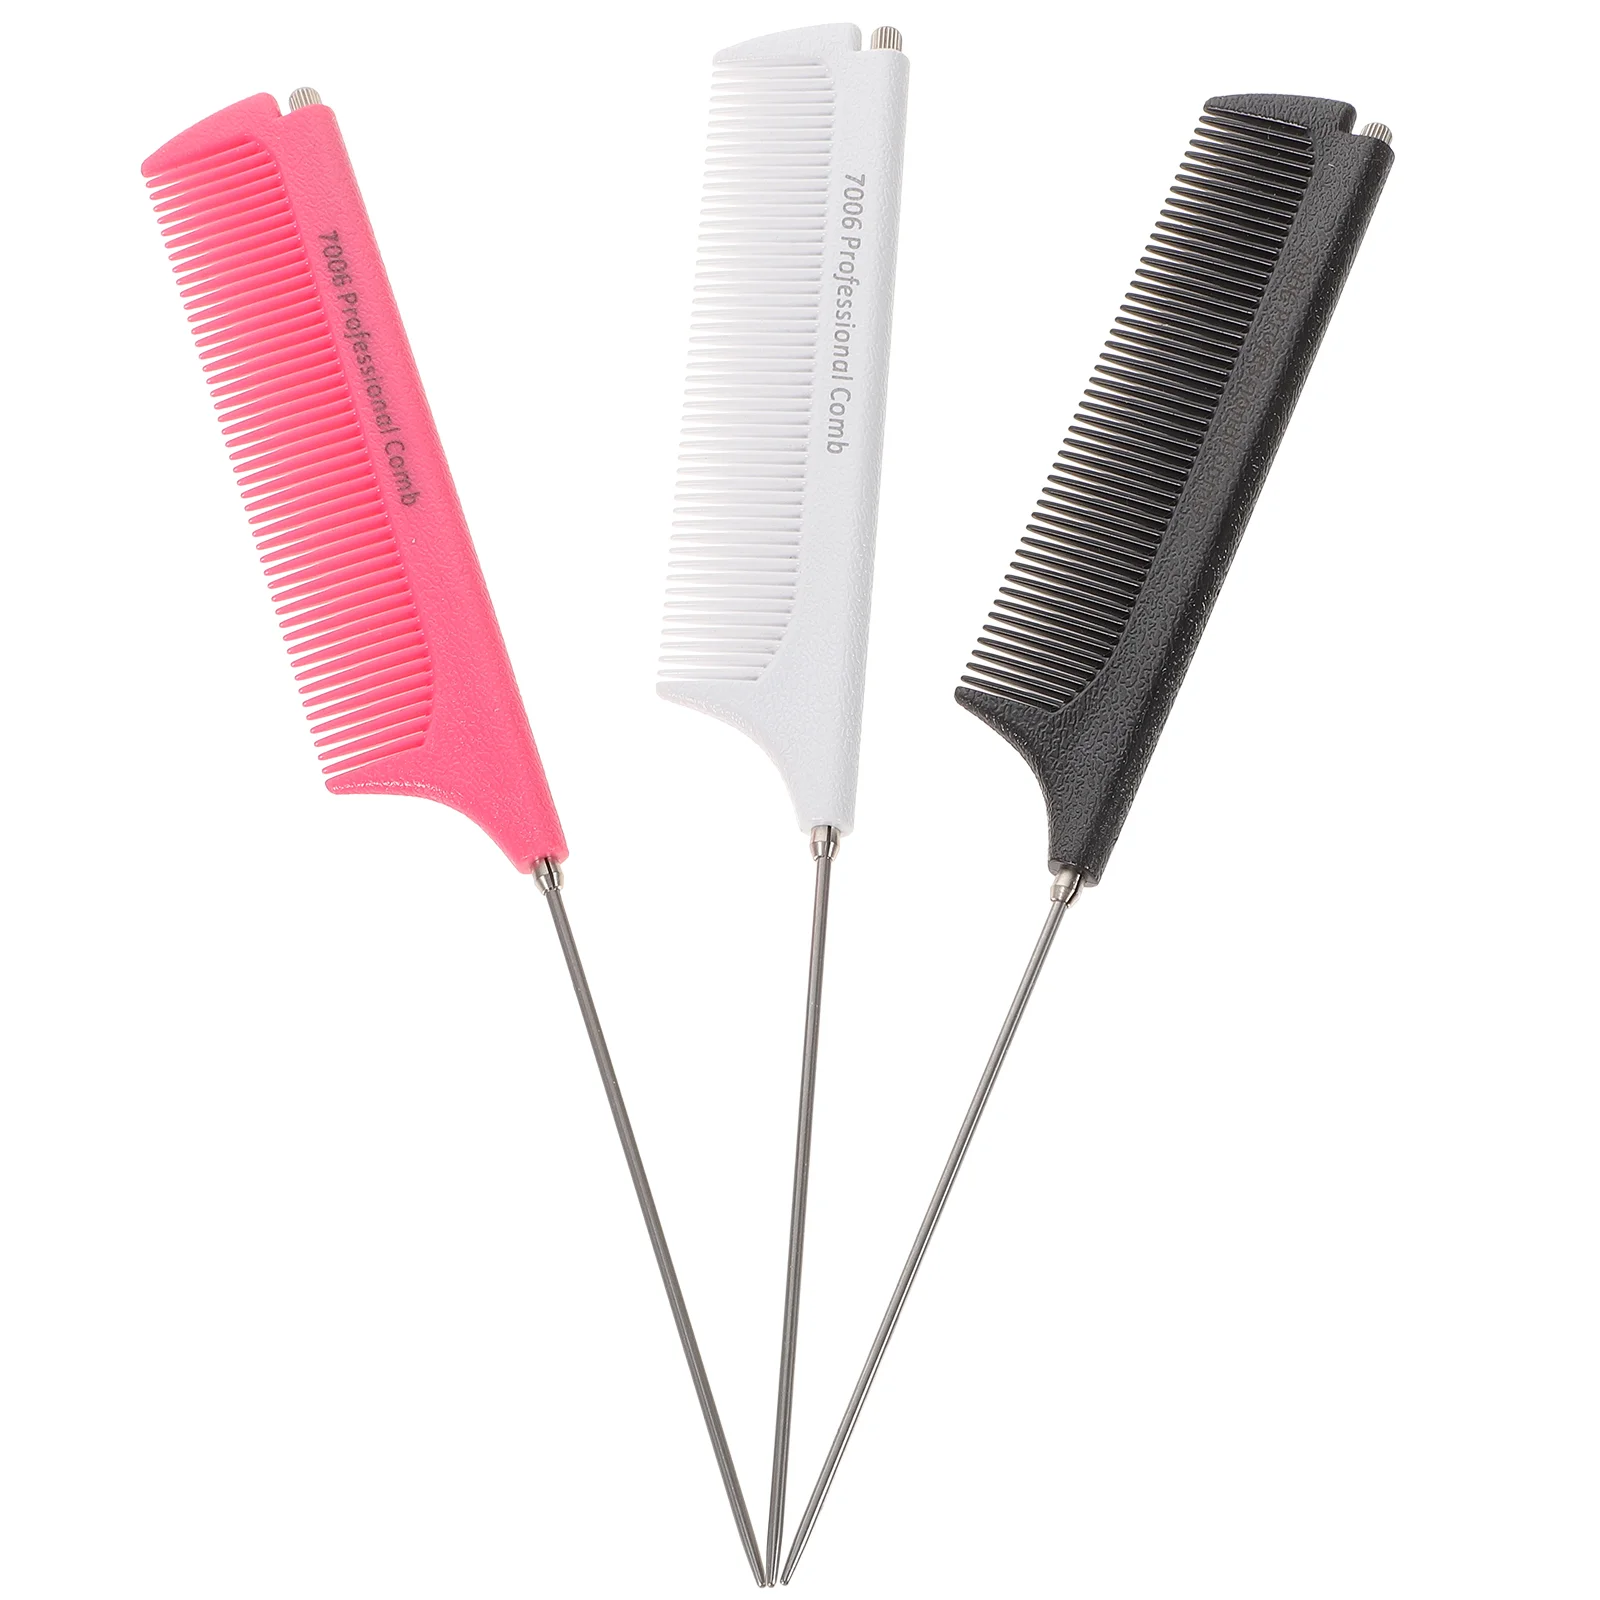 

Comb Hair Rat Tail Combs Teasing Parting Tooth Metal Styling Fine Braiding Steel Static Accessories Anti Brush Women Pintail